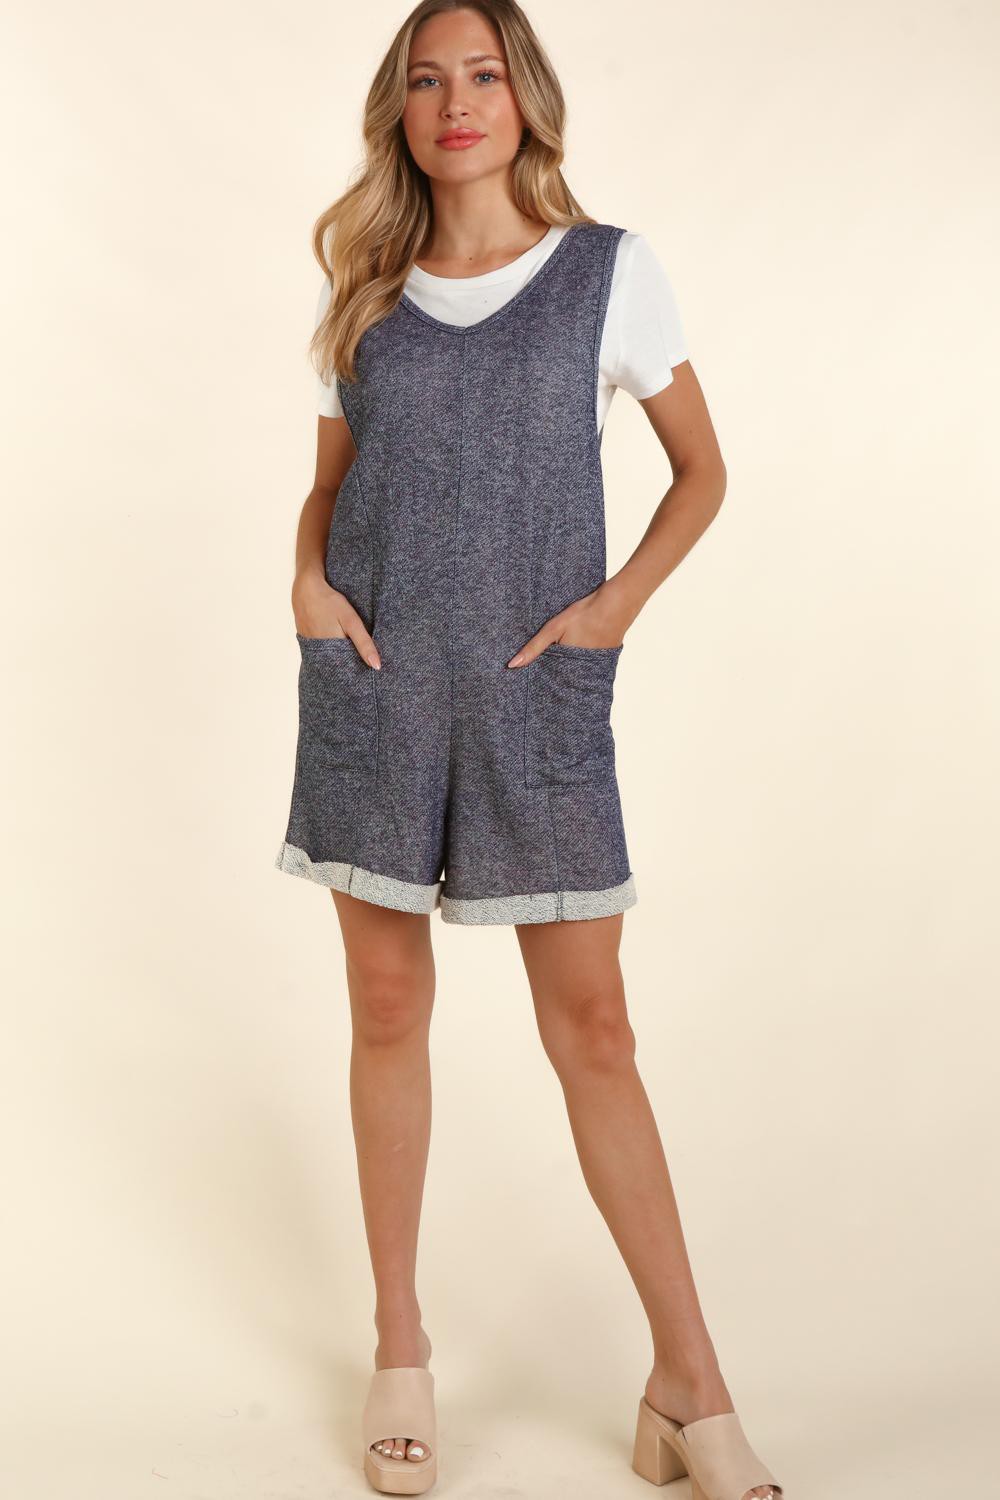 Picking Up The Pieces Romper